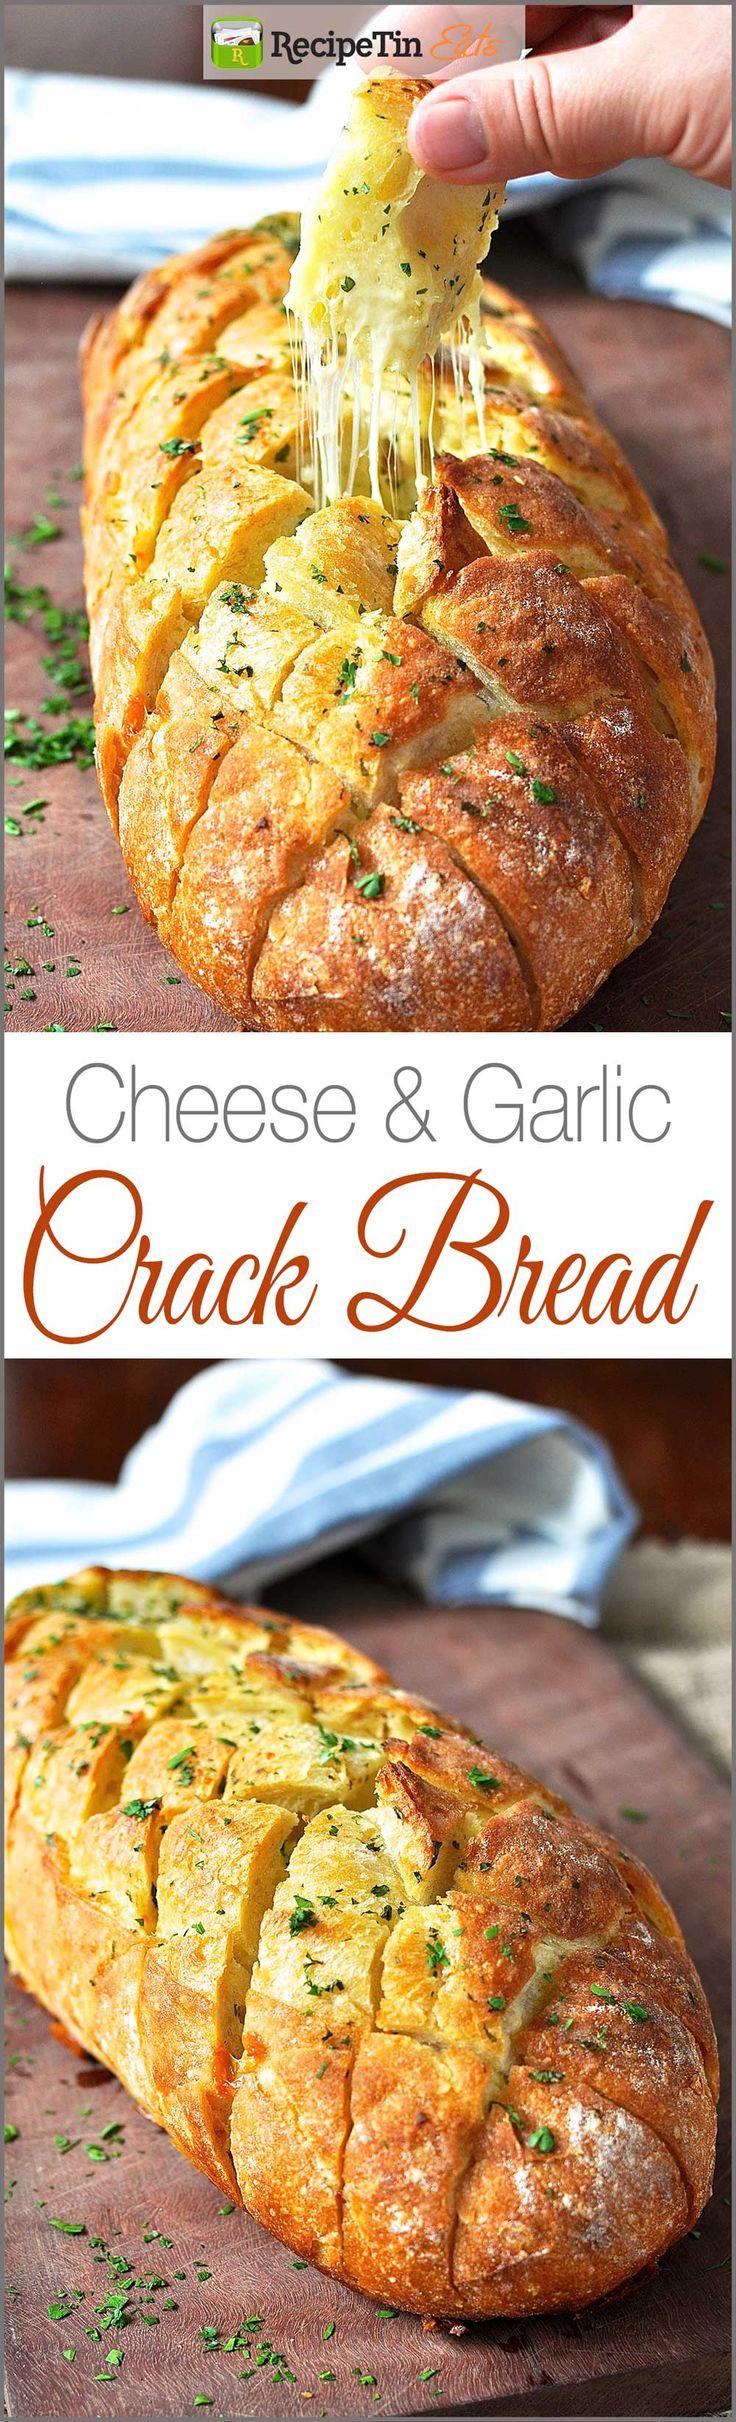 Mariage - Cheese And Garlic Crack Bread (Pull Apart Bread)